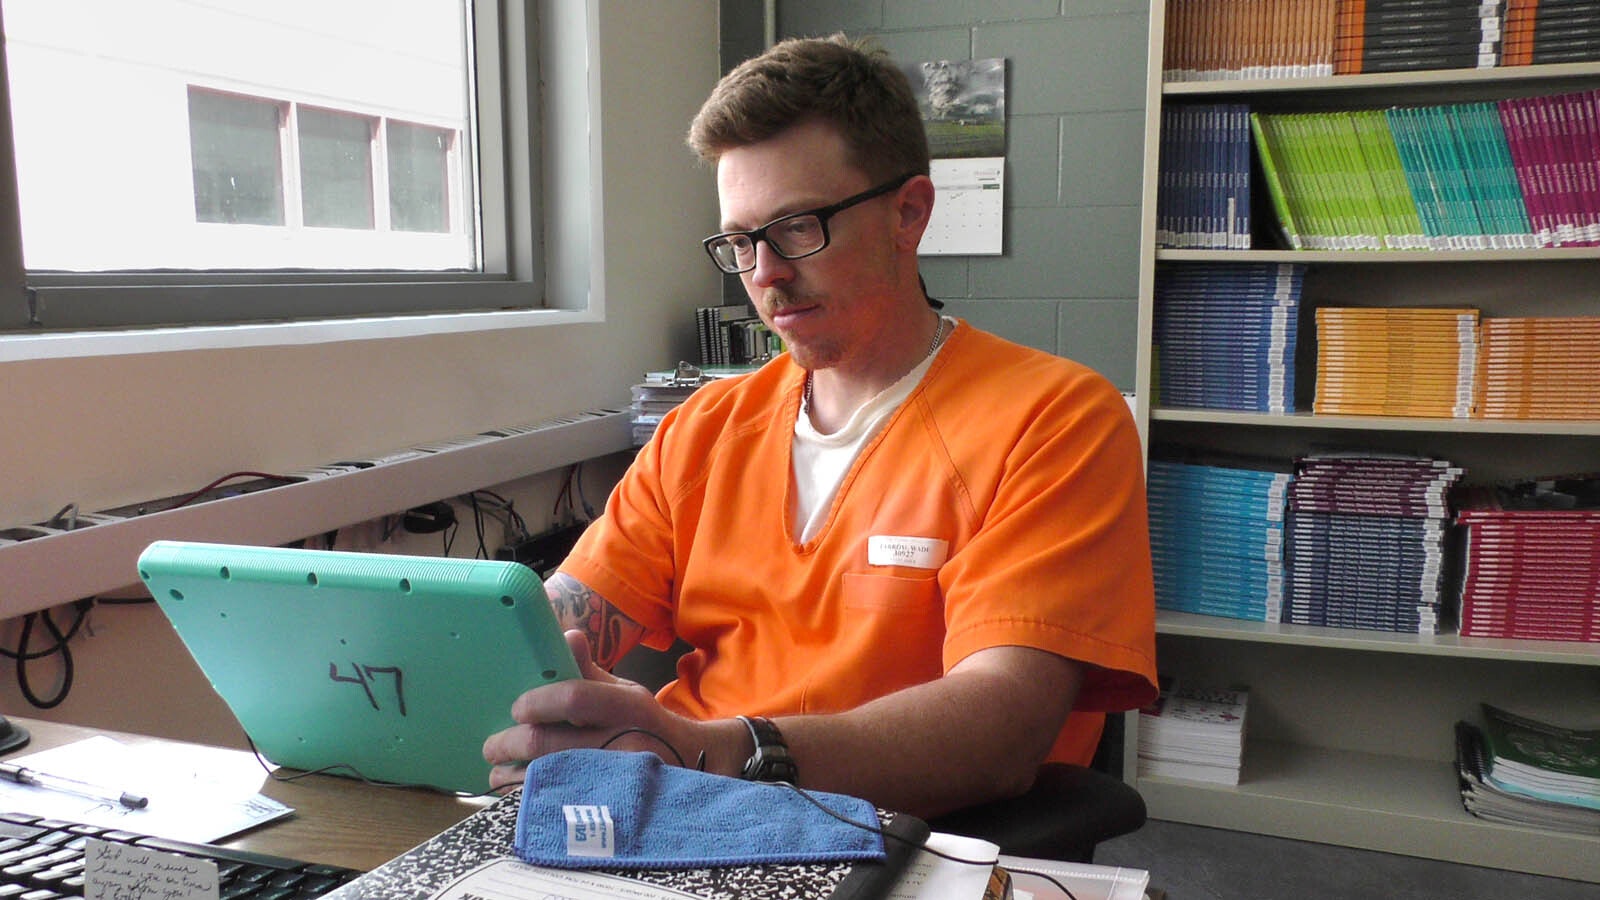 Wade Farrow, 36, is one of 20 male inmates at the Wyoming Medium Correctional Institution earning a bachelor’s degree through the University of Wyoming’s Pathways from Prison program.